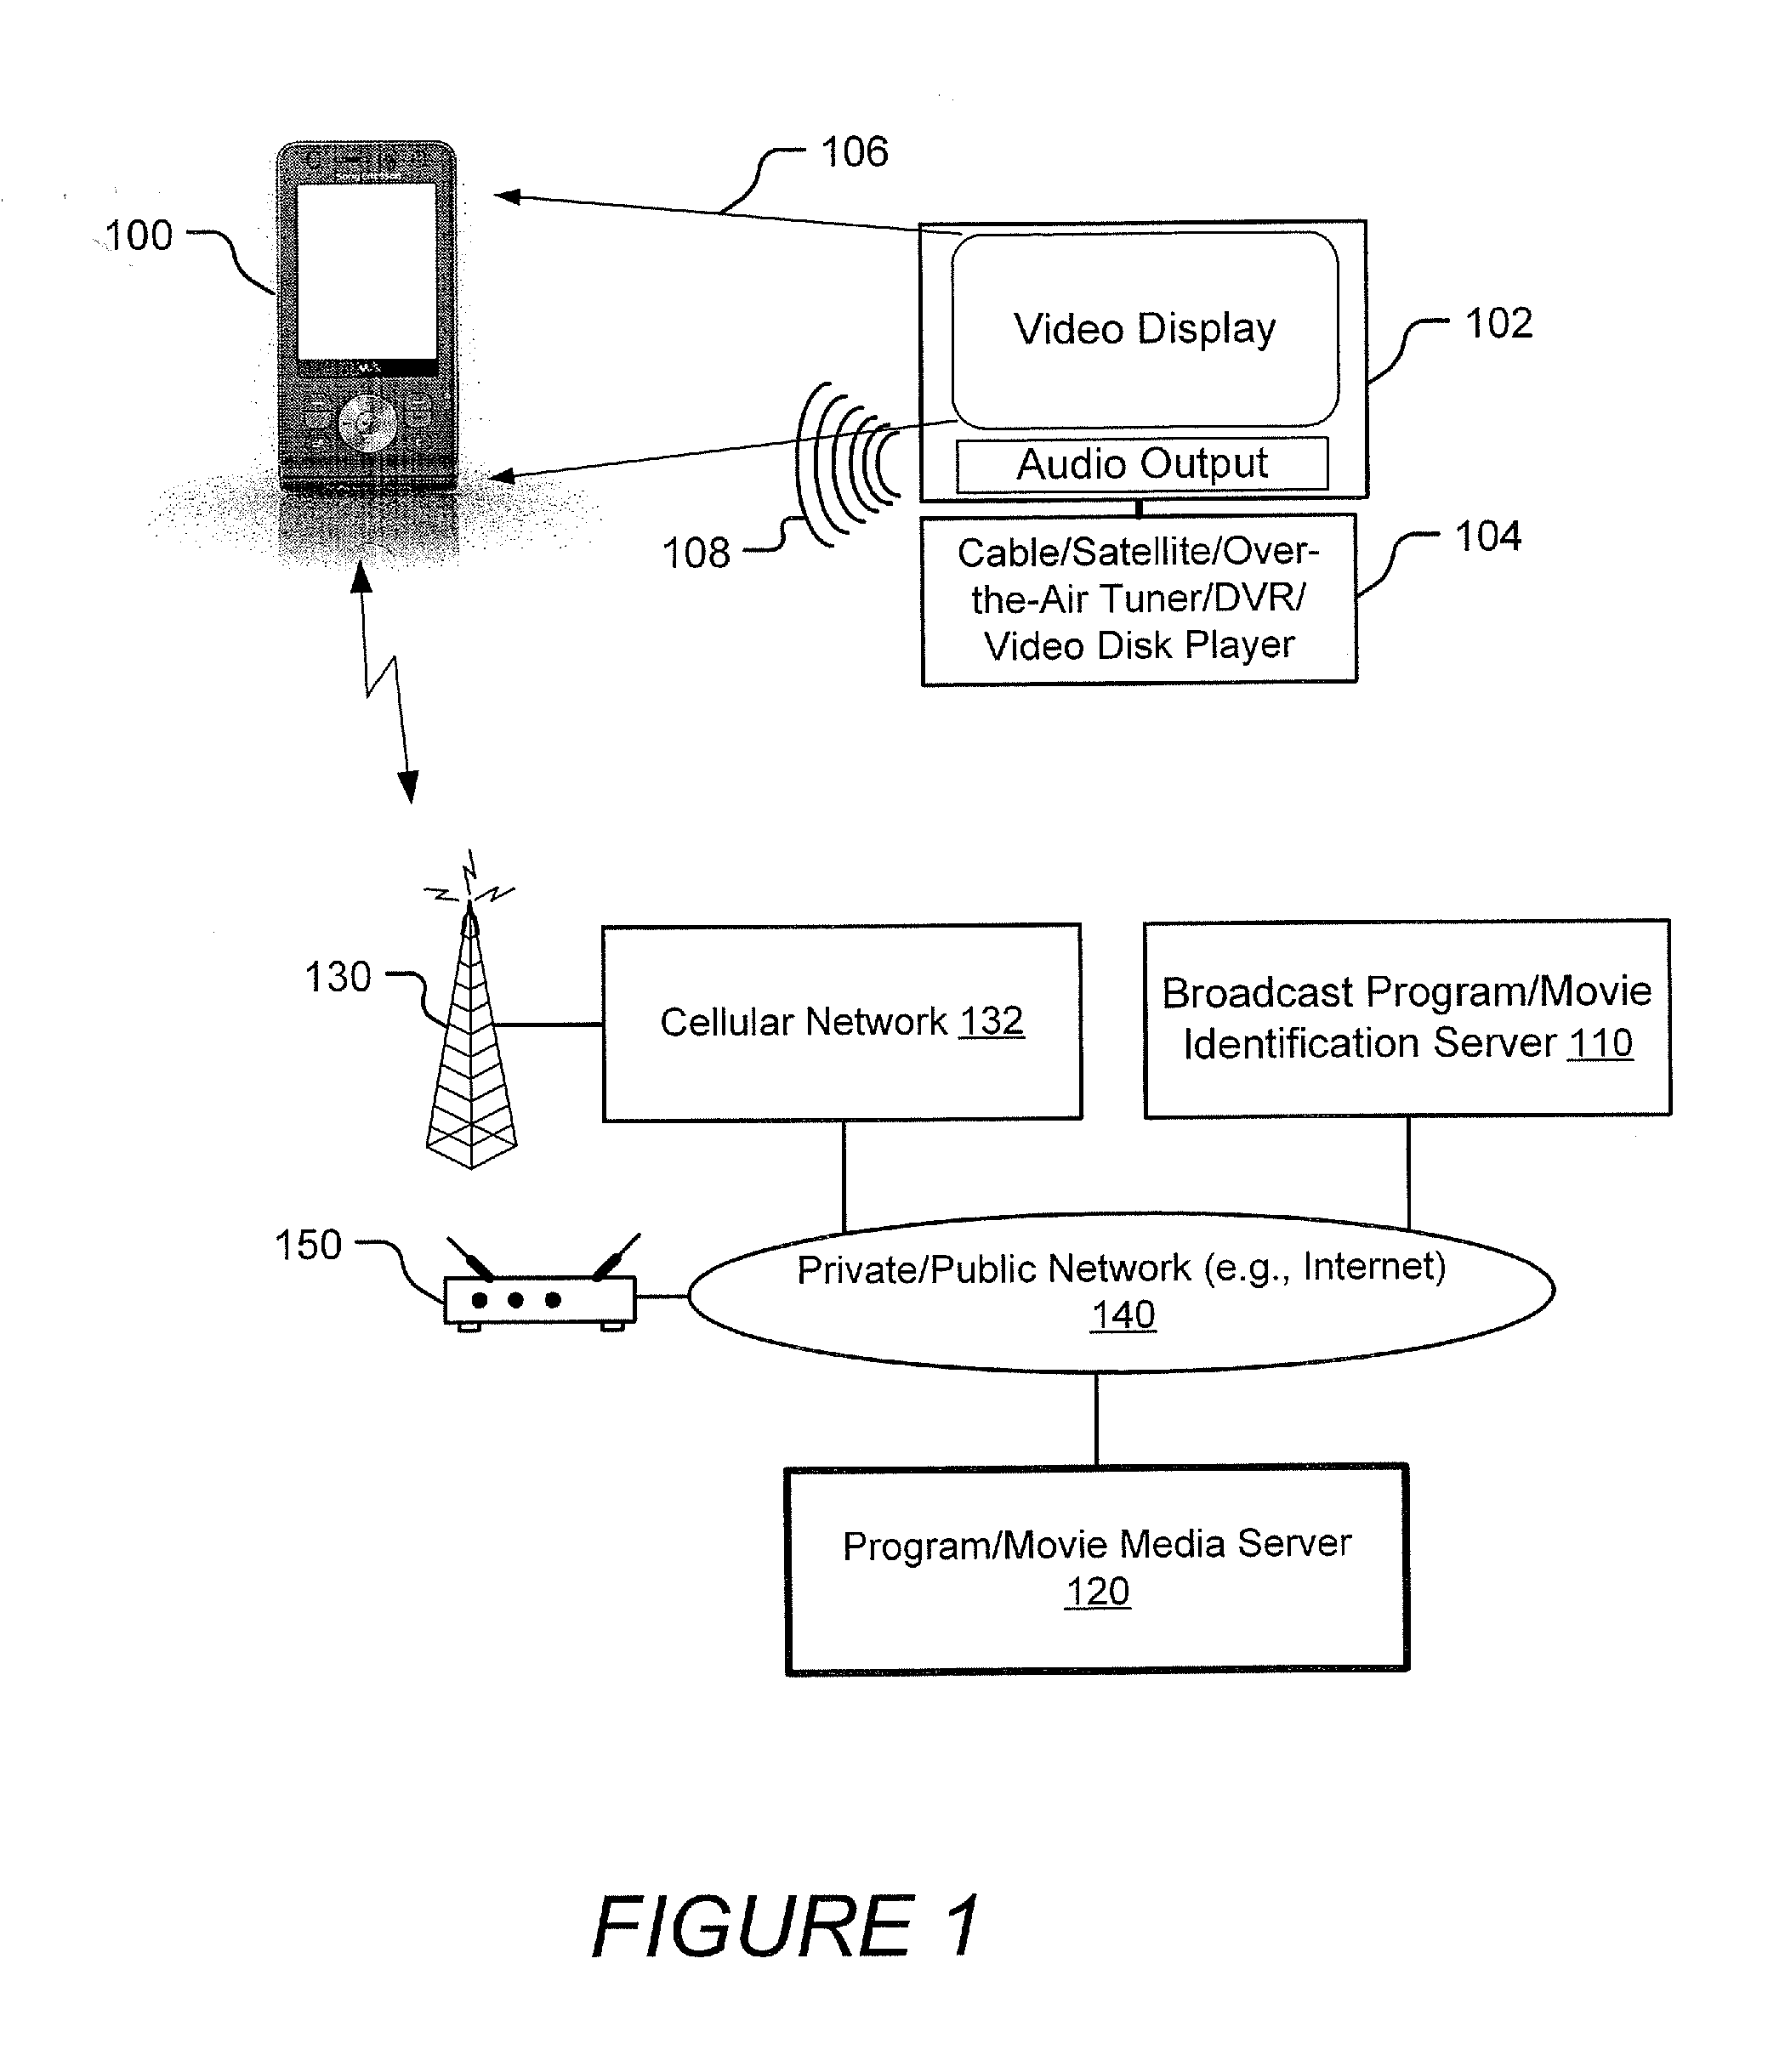 Terminals, servers, and methods that find a media server to replace a sensed broadcast program/movie